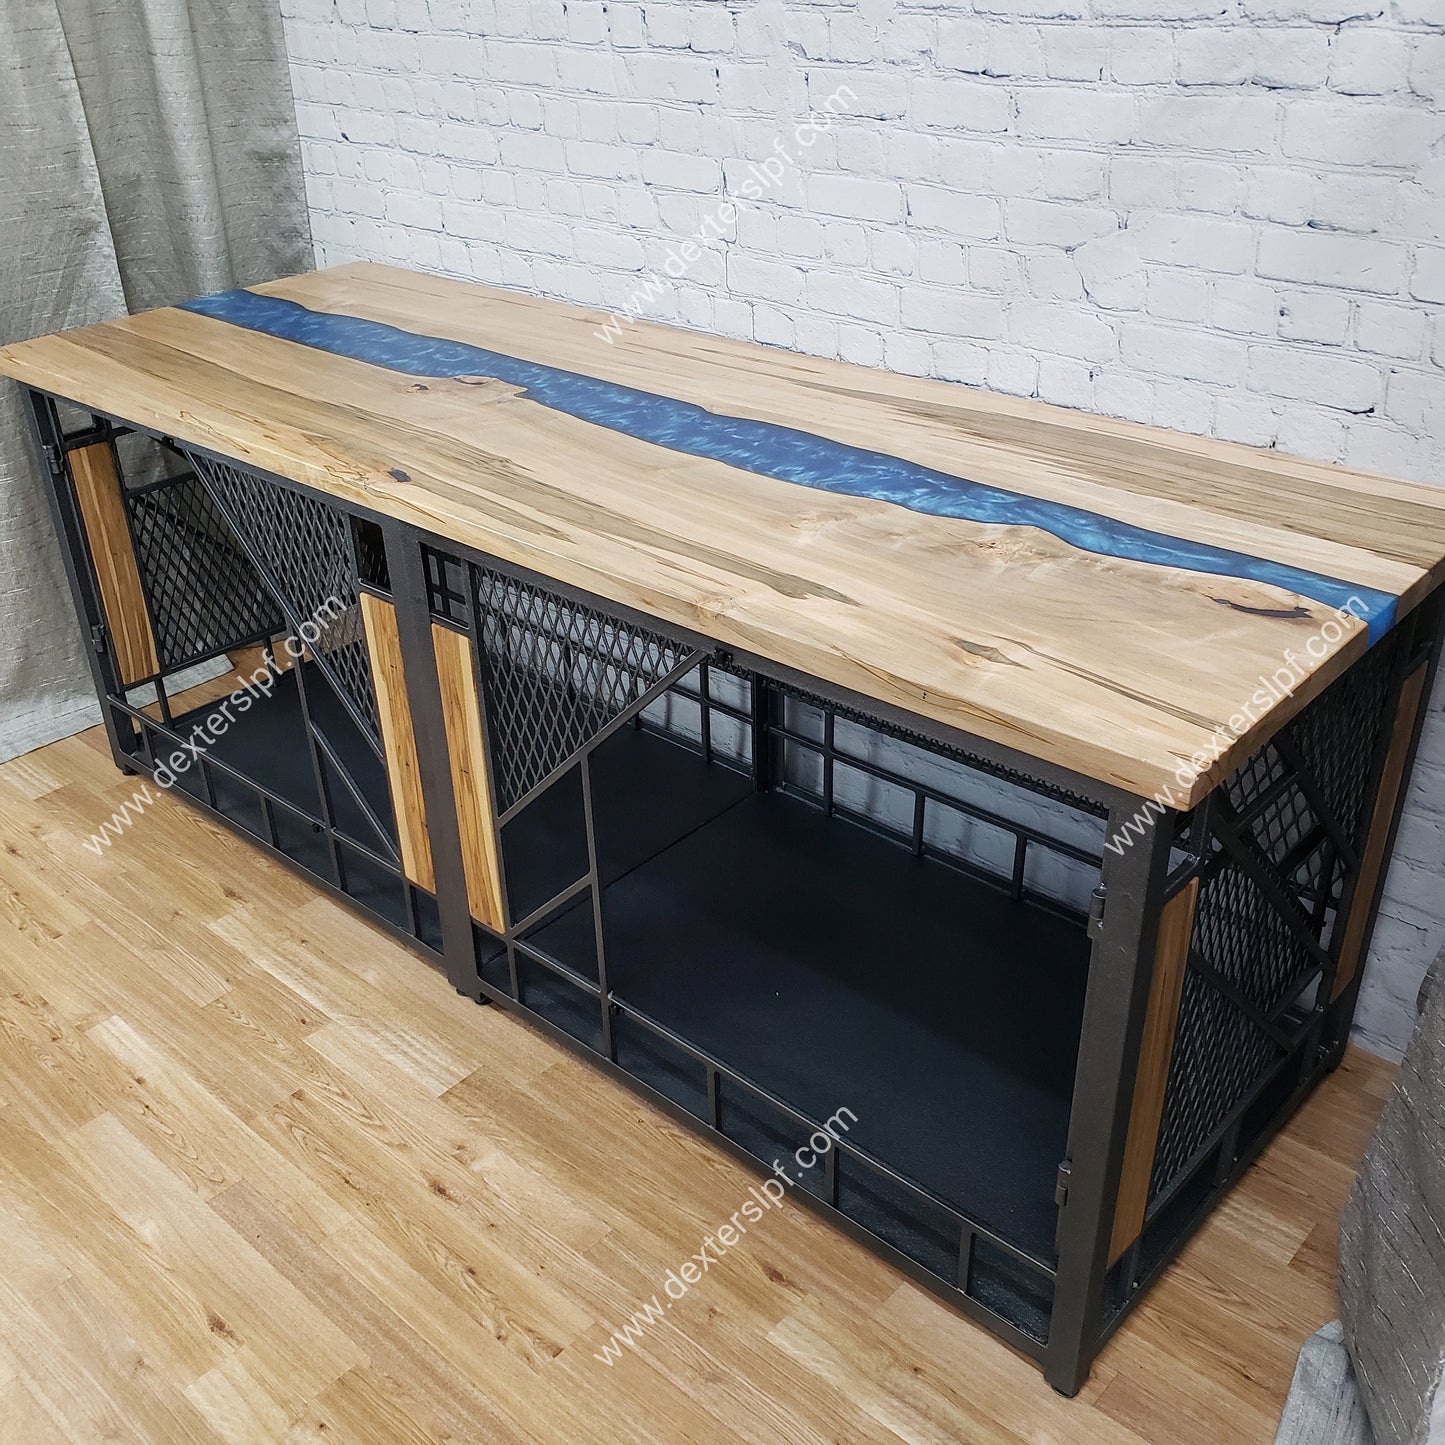 Remy X-Large Double, Dog Kennel Furniture, Modern Dog Crate, River Table, Dog Crate Table, Epoxy River Table, X-Large Dog Crate